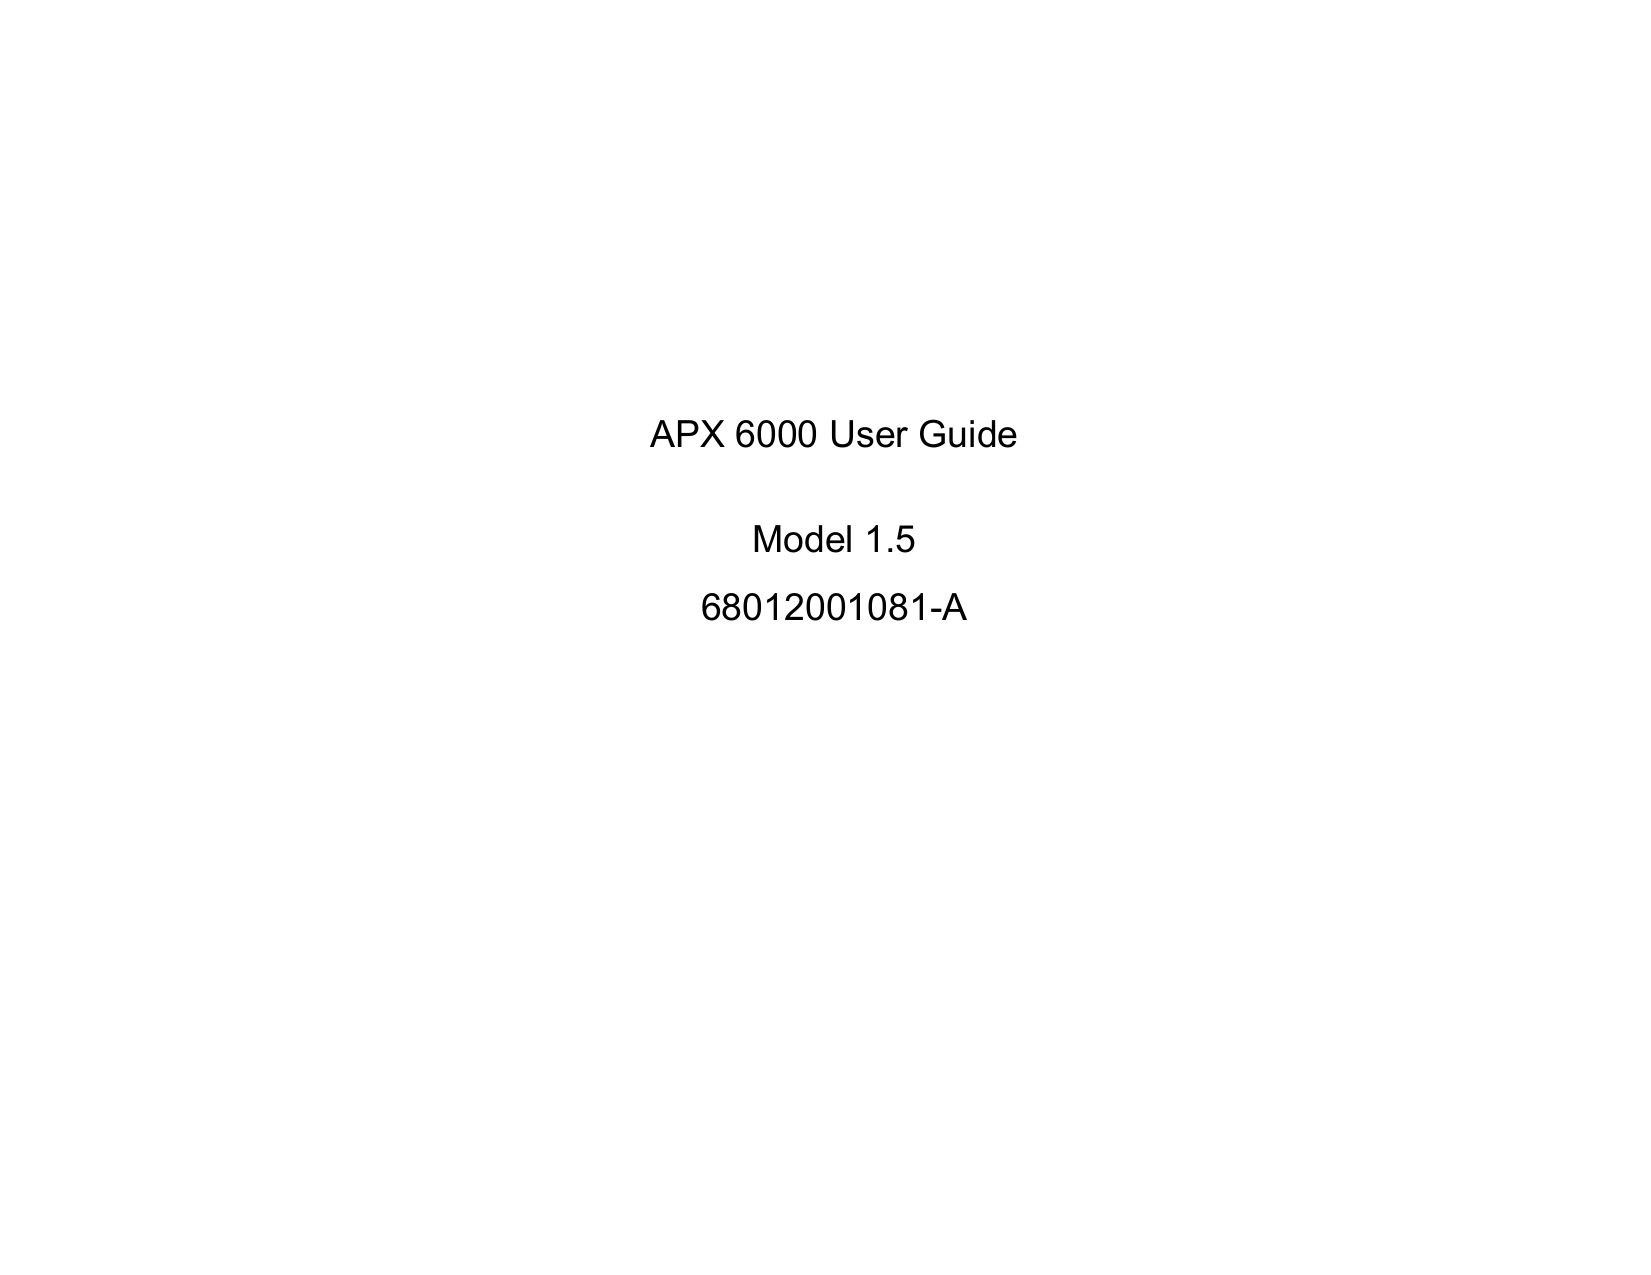 APX 6000 User GuideModel 1.568012001081-A